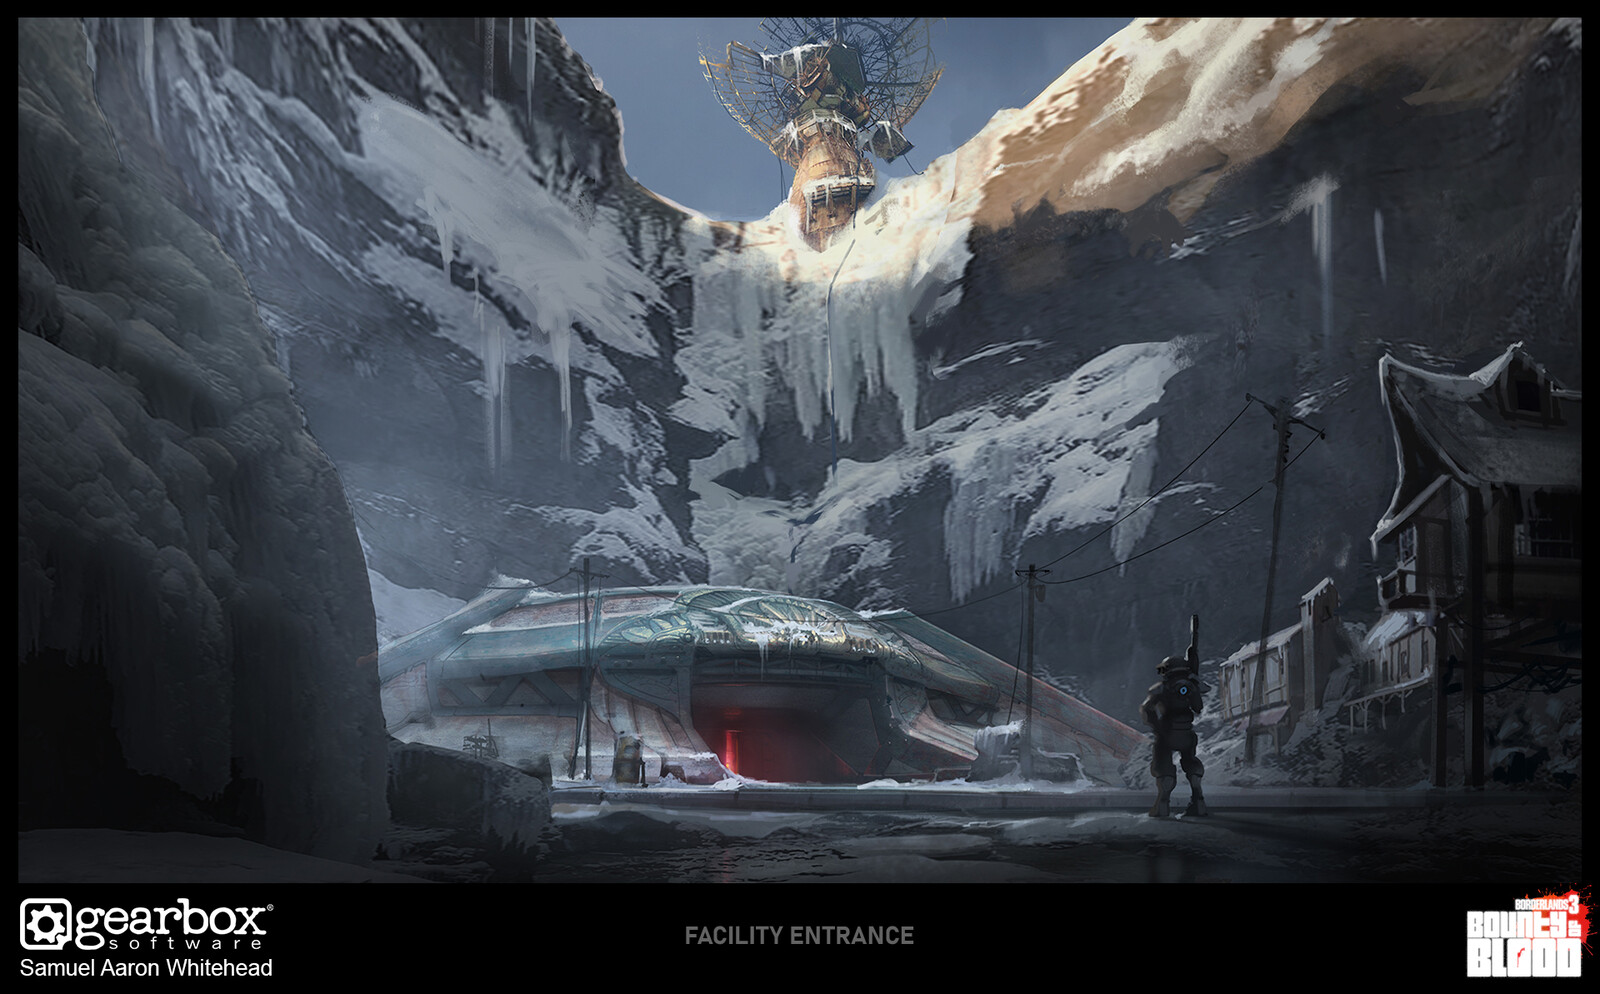 We originally considered placing the facility entrance in a much colder, higher altitude environment, but later we decided we wanted to keep it more distinct from Ashfall.